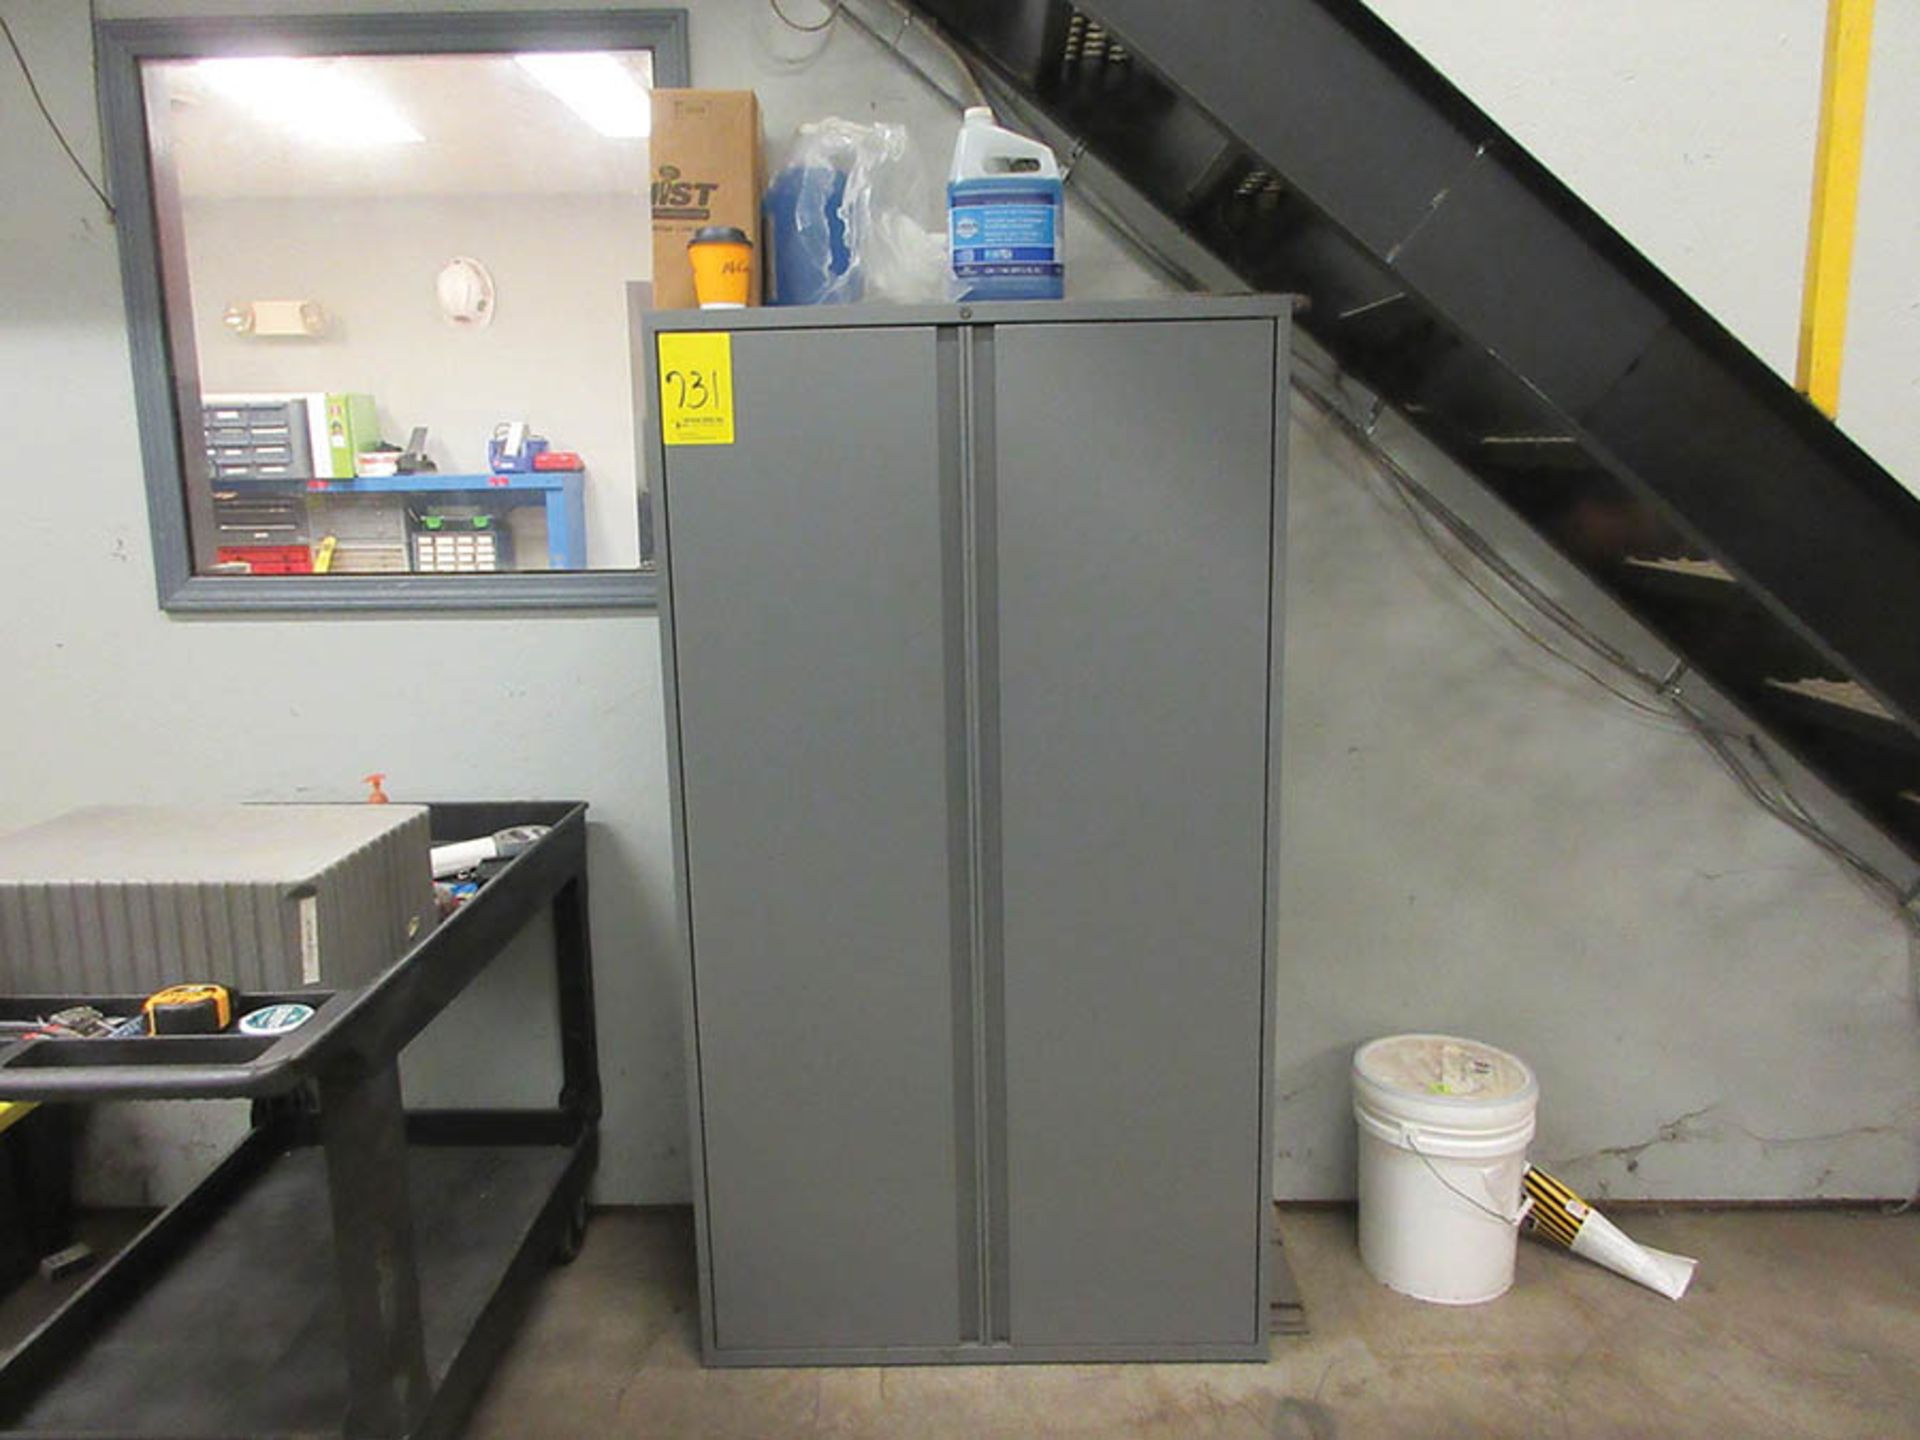 (6) METRO RACKS, (3) 2-DOOR CABINETS W/ CONTENTS OF PREPARED INVENTORY AND CLEANING PRODUCTS - Image 10 of 13